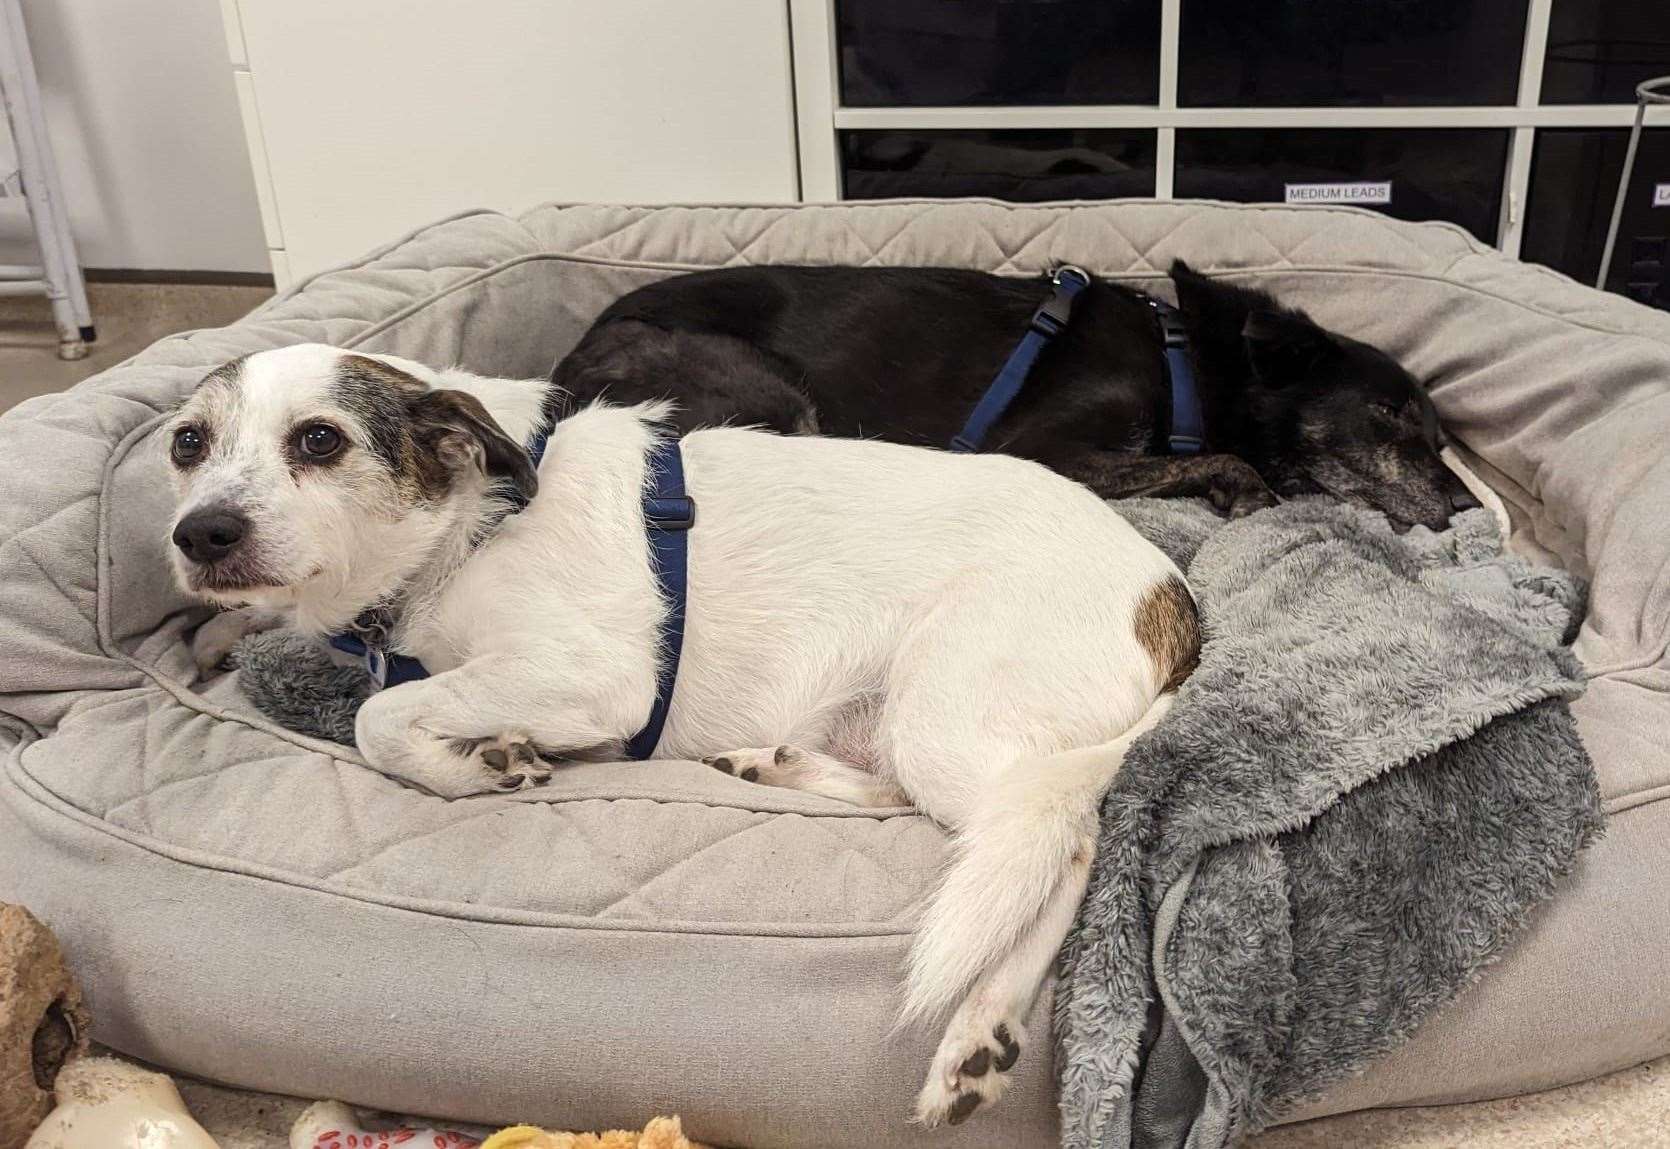 Best friends Poppy, a nine-year-old Jack Russell Terrier Cross, and Misty, a 12-year-old Crossbreed